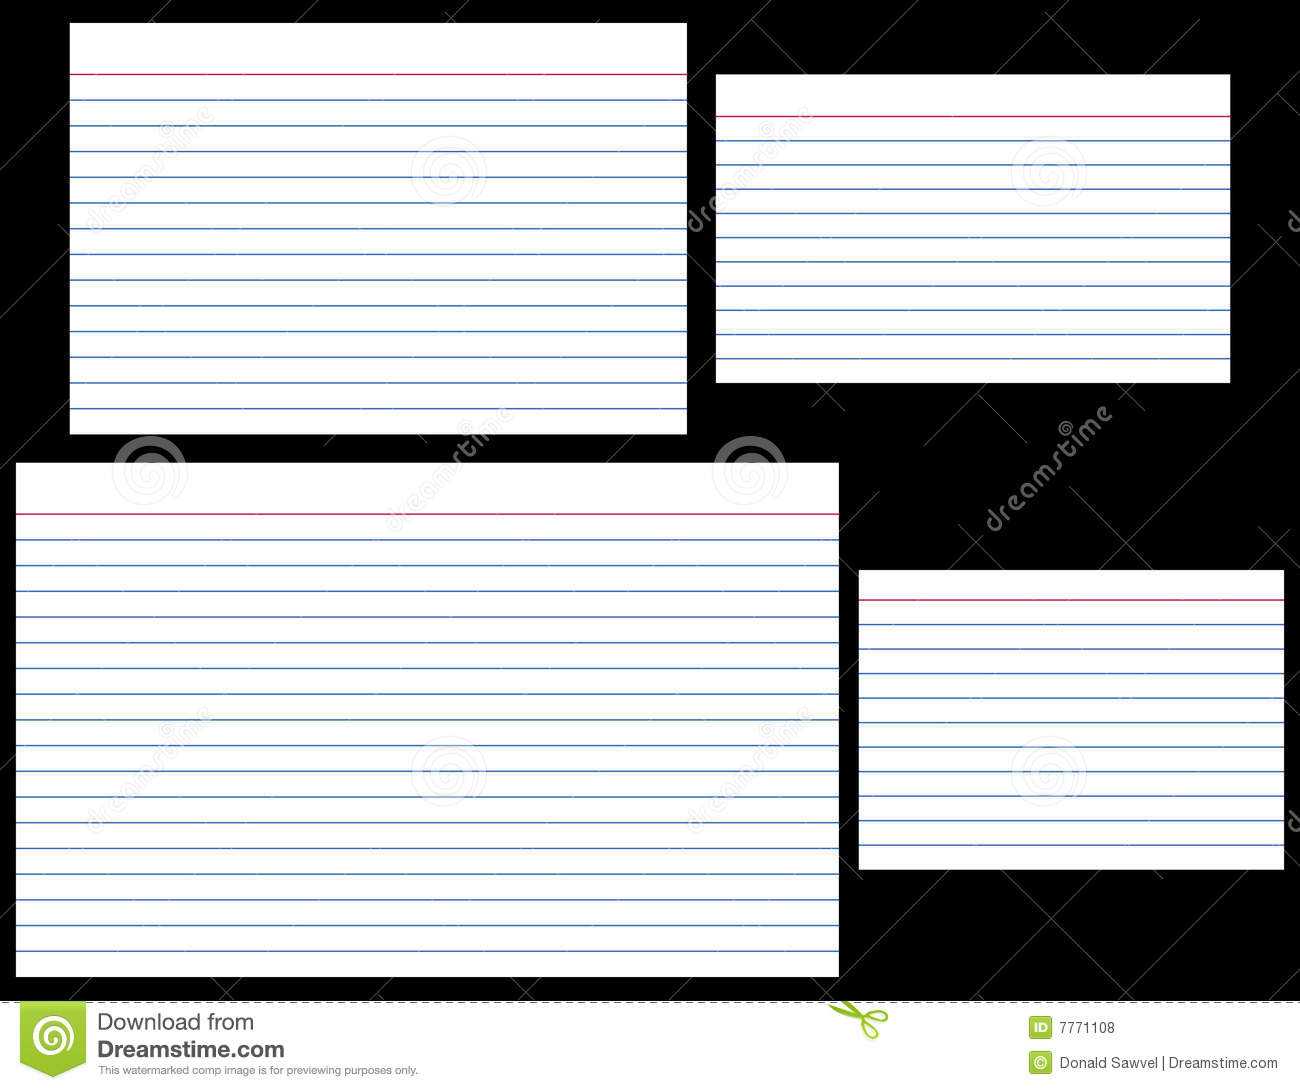 Index Cards Stock Vector. Illustration Of Card, Note, Blank Throughout 3 X 5 Index Card Template